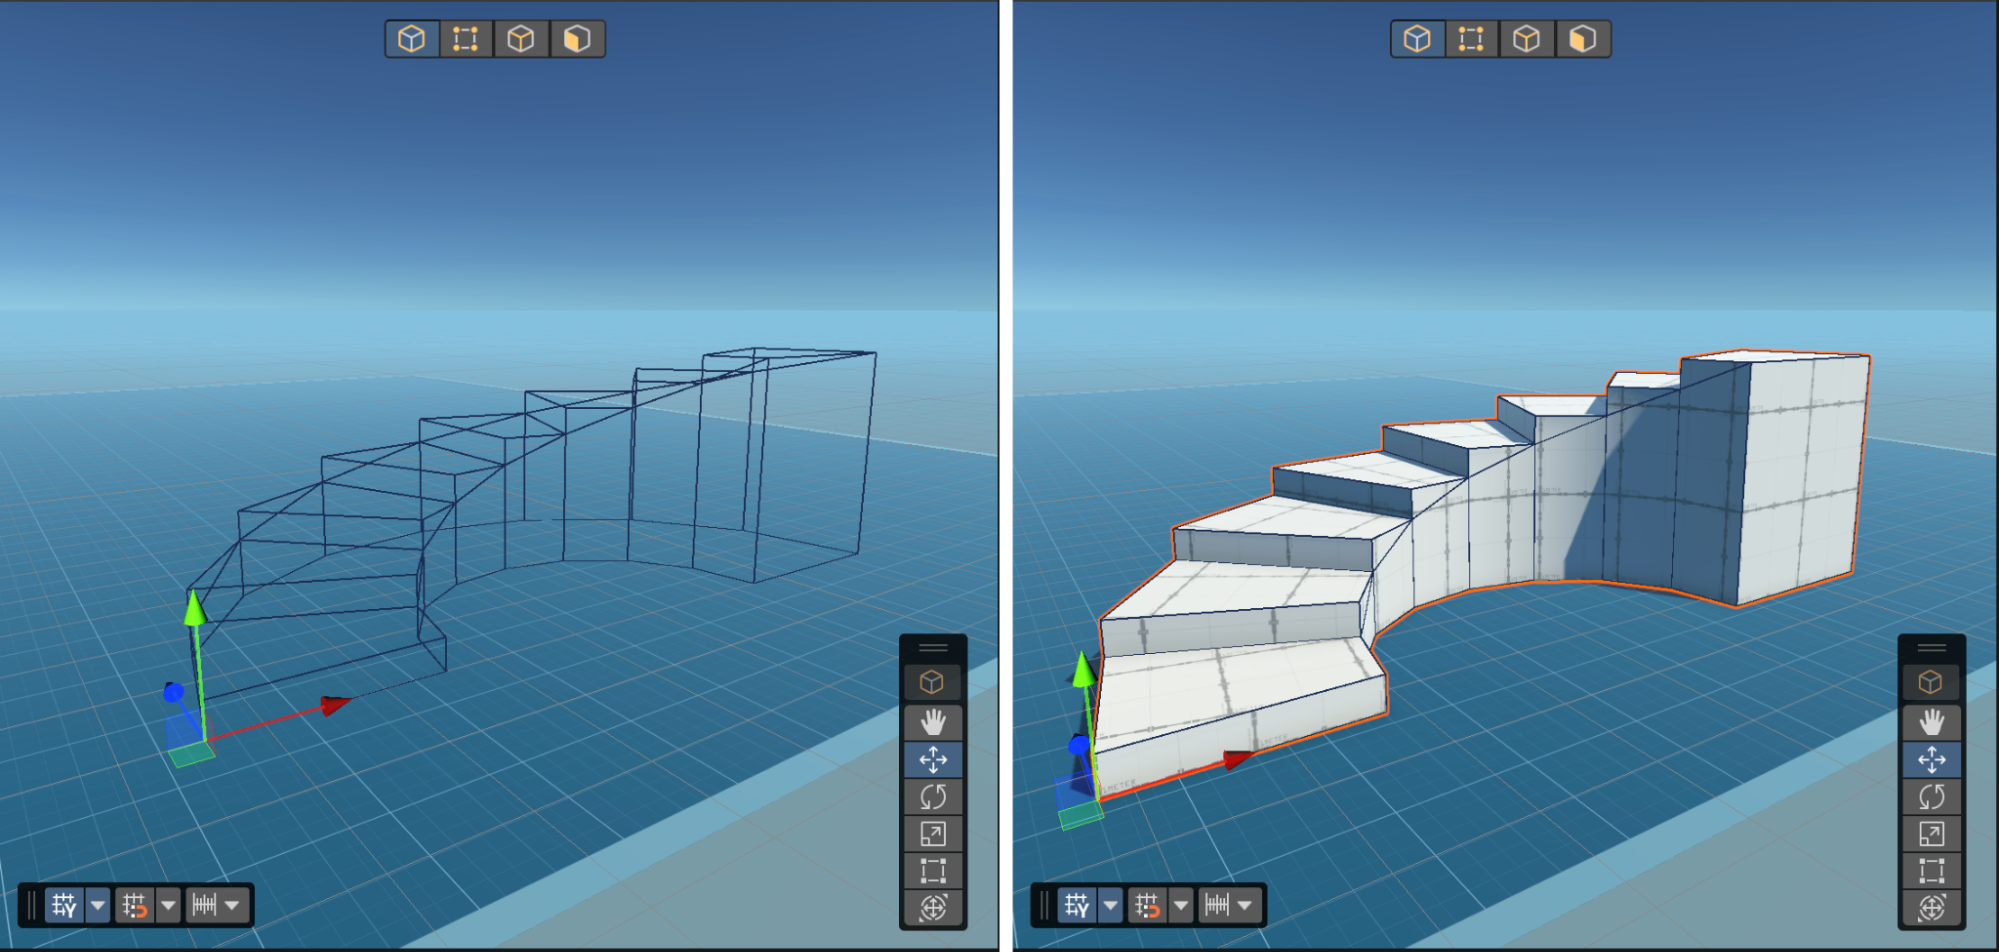 A new project in Unity 2022 LTS using URP, a staircase created before and after installing the support file